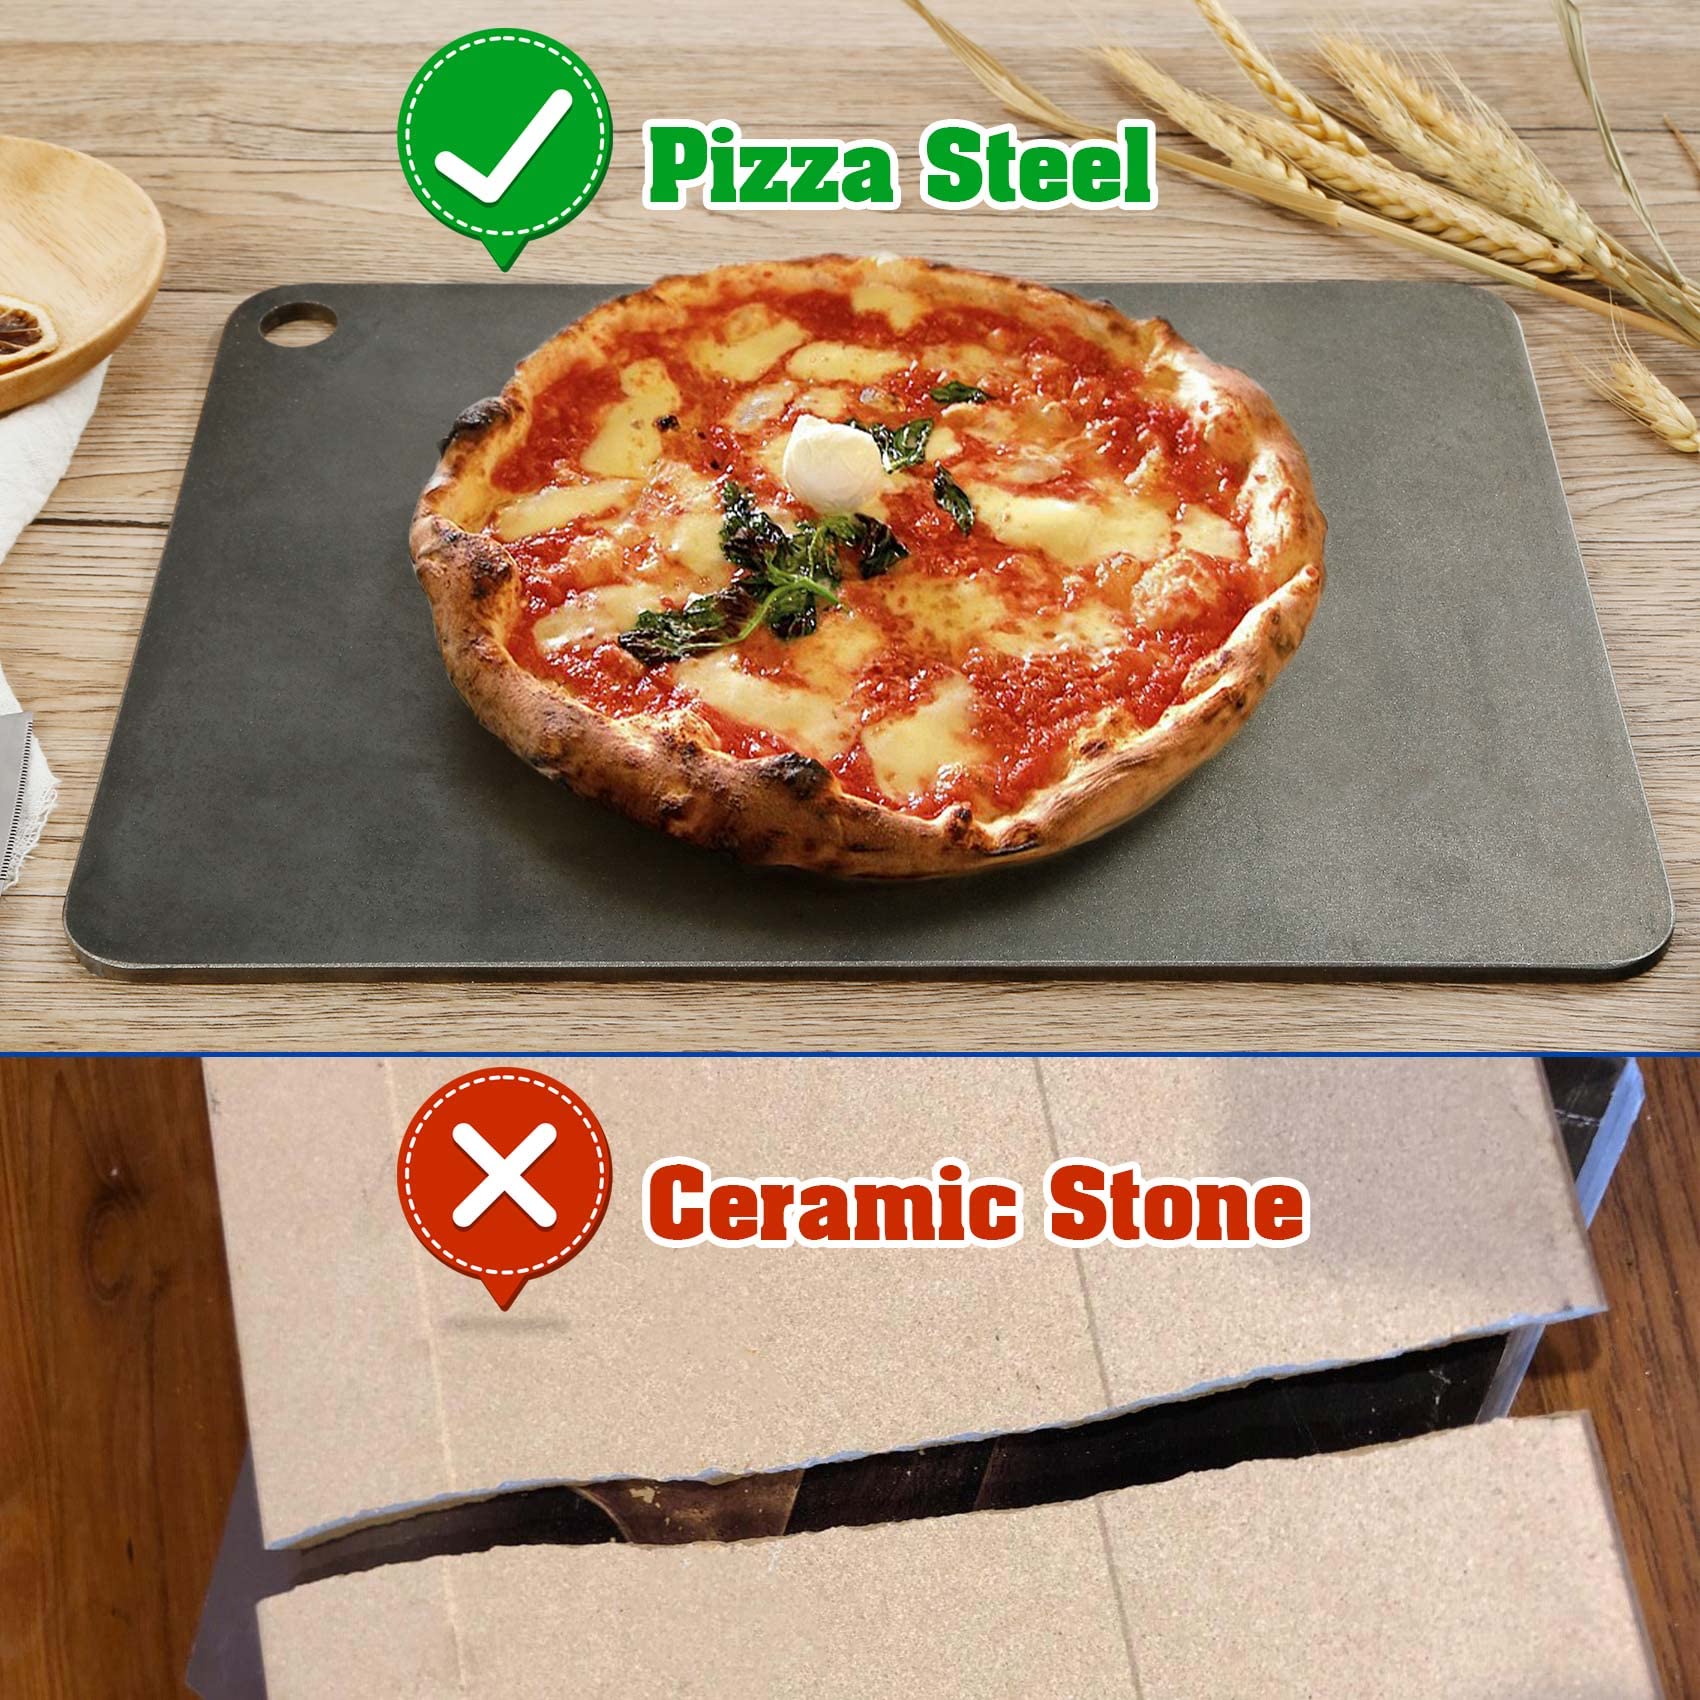 TCFUNDY Pizza Steel for Oven, Baking Steel Pizza Stone for Grill and Oven, Pre-Seasoned Solid Carbon Steel Non-Stick Pizza Pans, 13.5